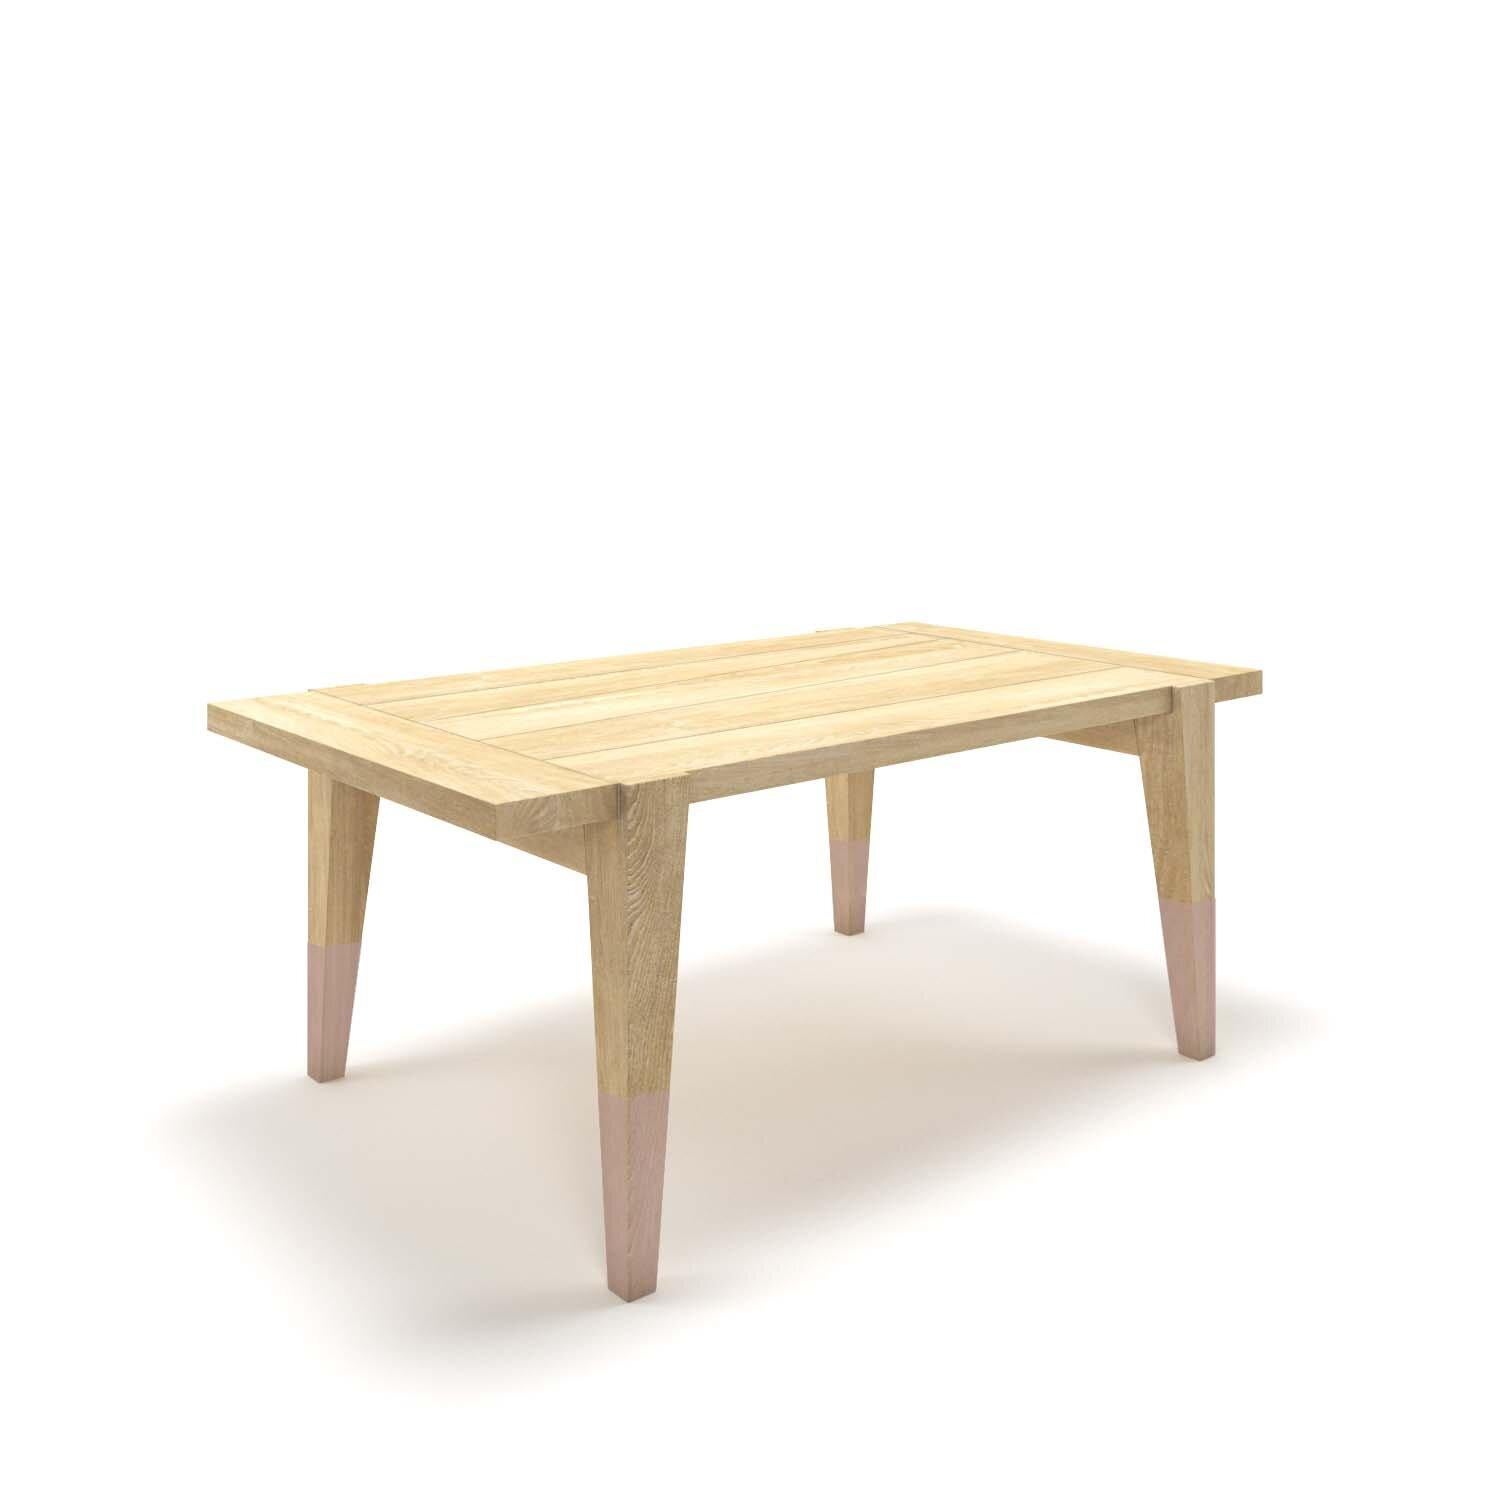 Transform your dining space with the Uva table! Made of beautiful, massive oak, this stunning table will make a statement in any room. Enjoy your meals surrounded by timeless beauty. Upgrade your home today with Uva!

All Tektōn pieces are made of